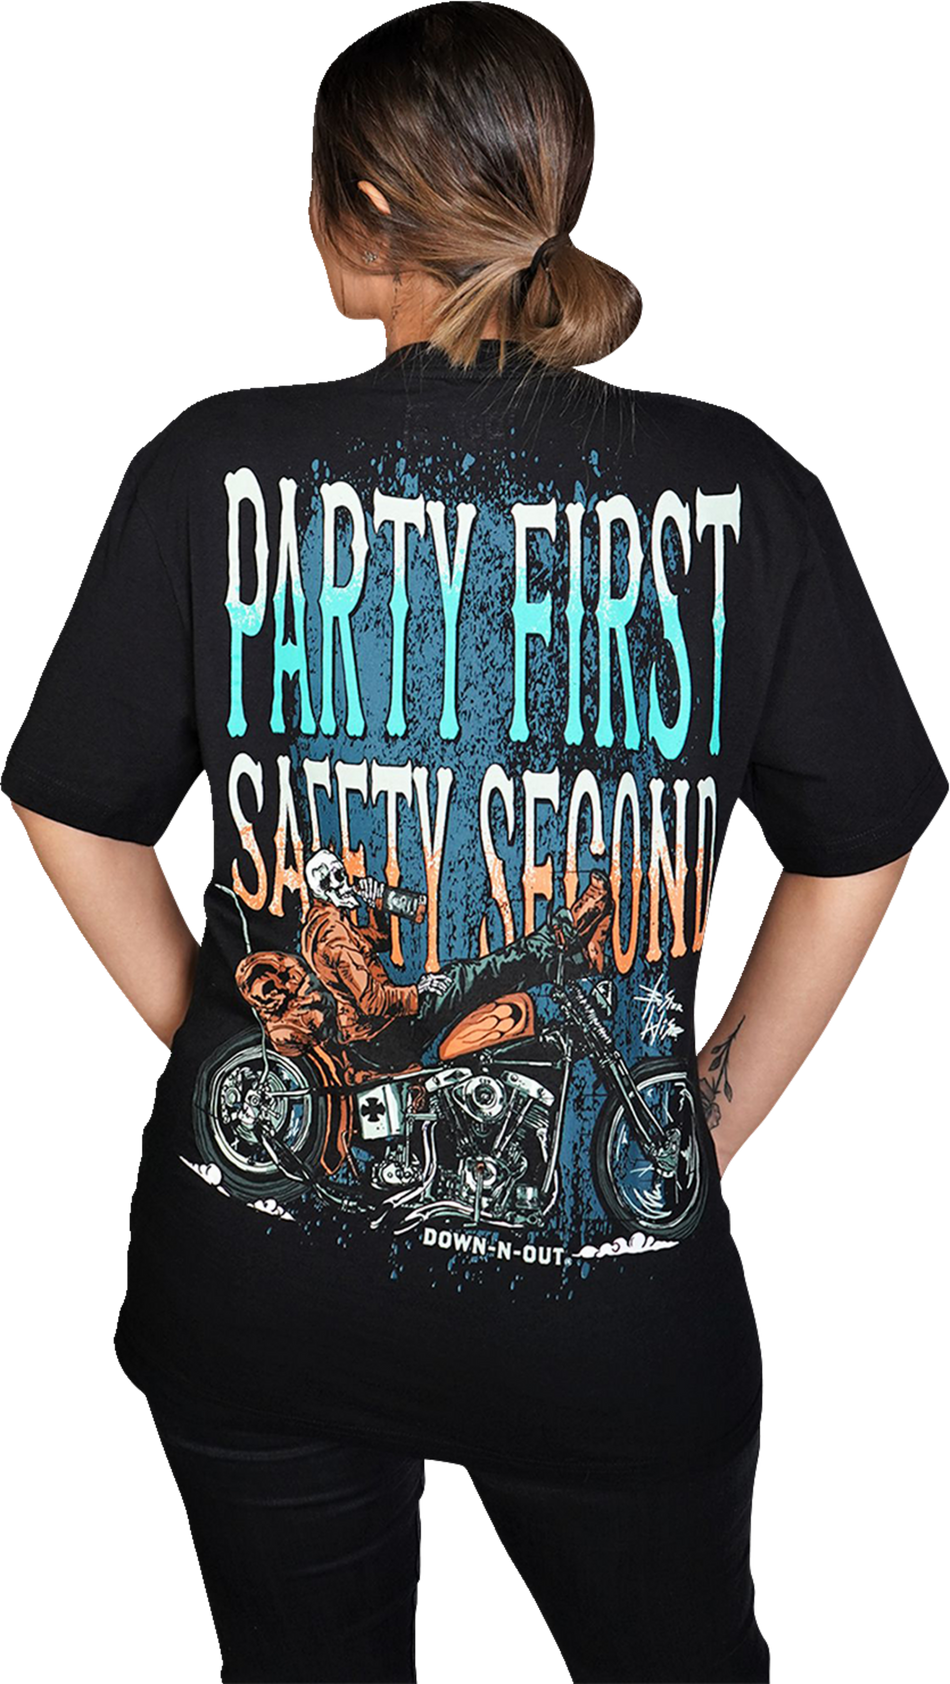 LETHAL THREAT Down-N-Out Party First Safety Second - Black - Small DT10043S